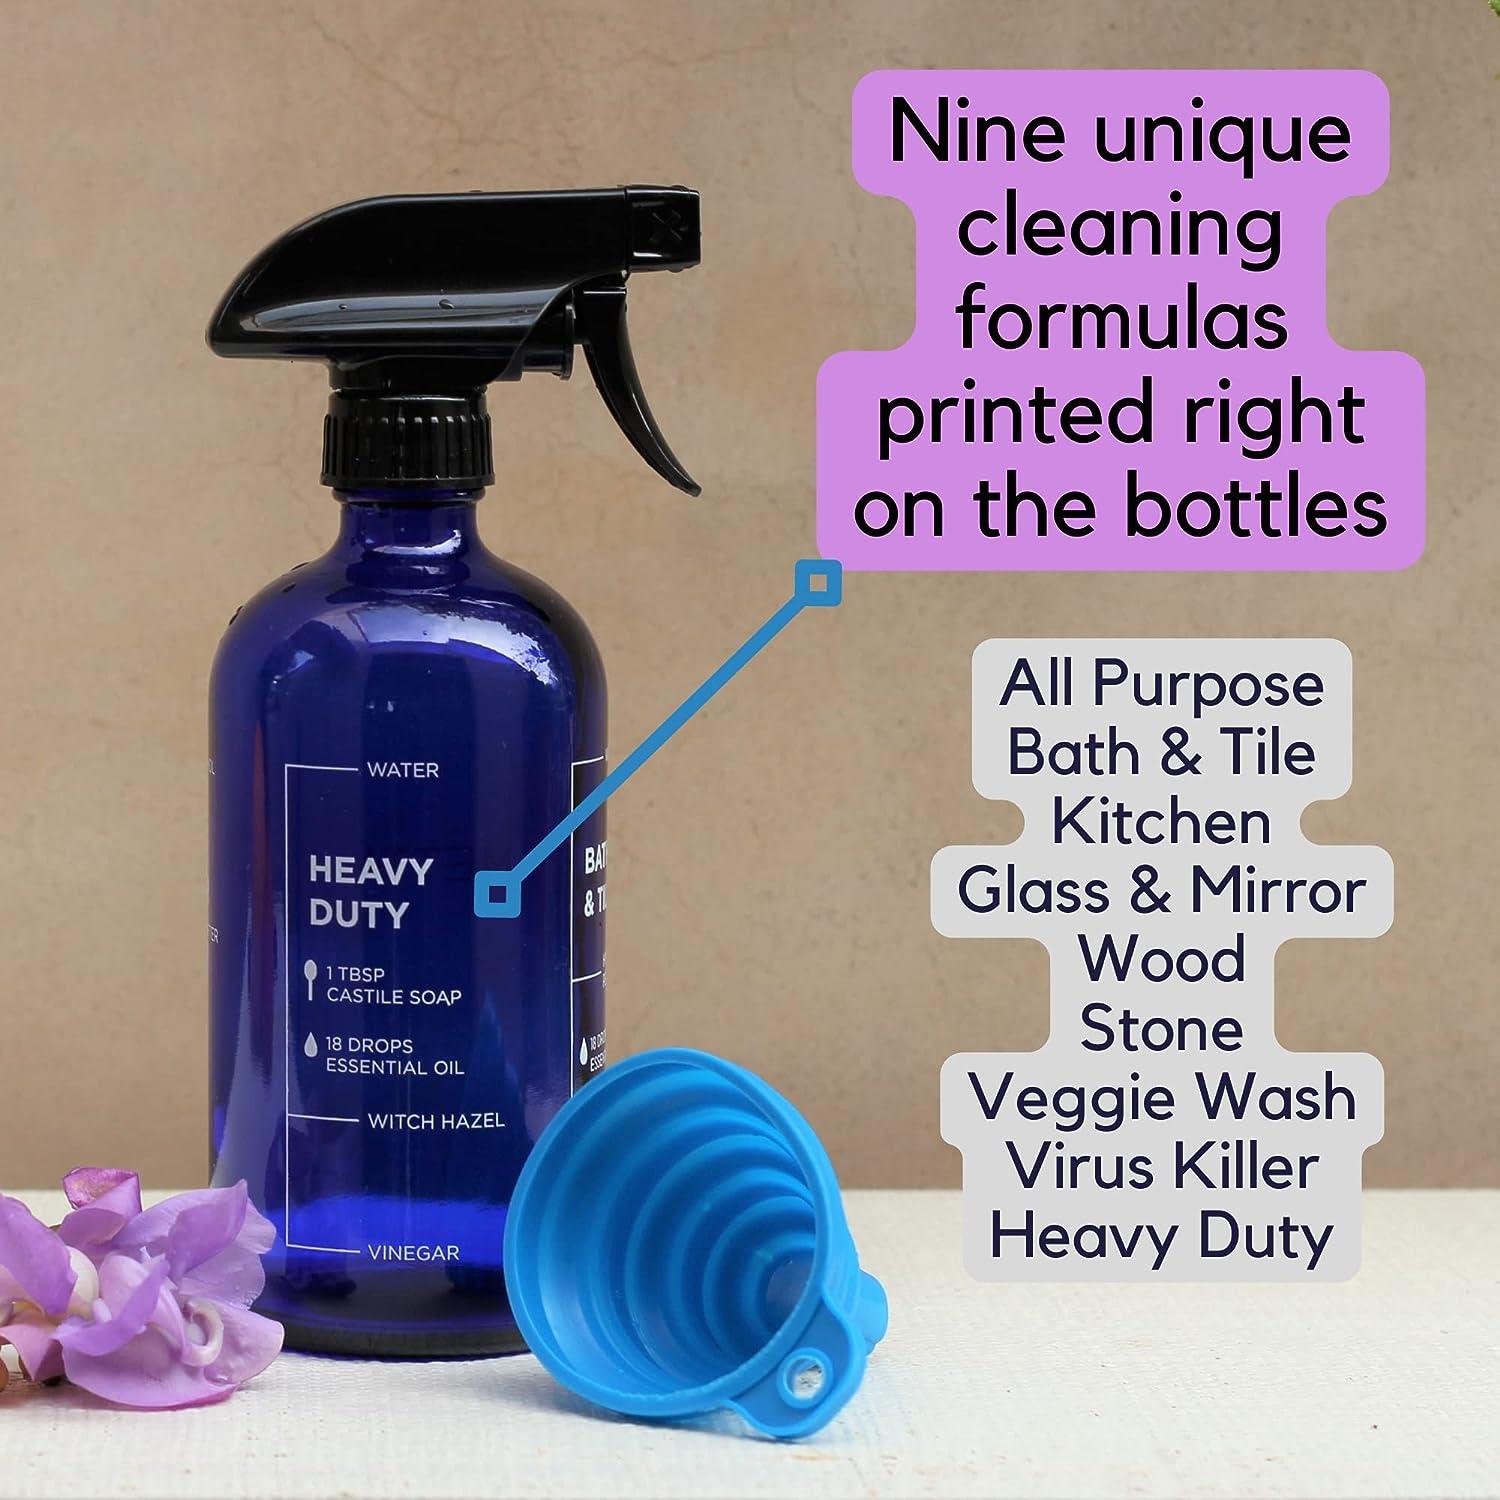 Premium Empty glass Spray Bottles for cleaning solutions with 09 Cleaning  Formulas. Reusable 16 oz spray bottles for cleaning solutions. Refillable  cleaning spray bottles with Adjustable Nozzle Squirt